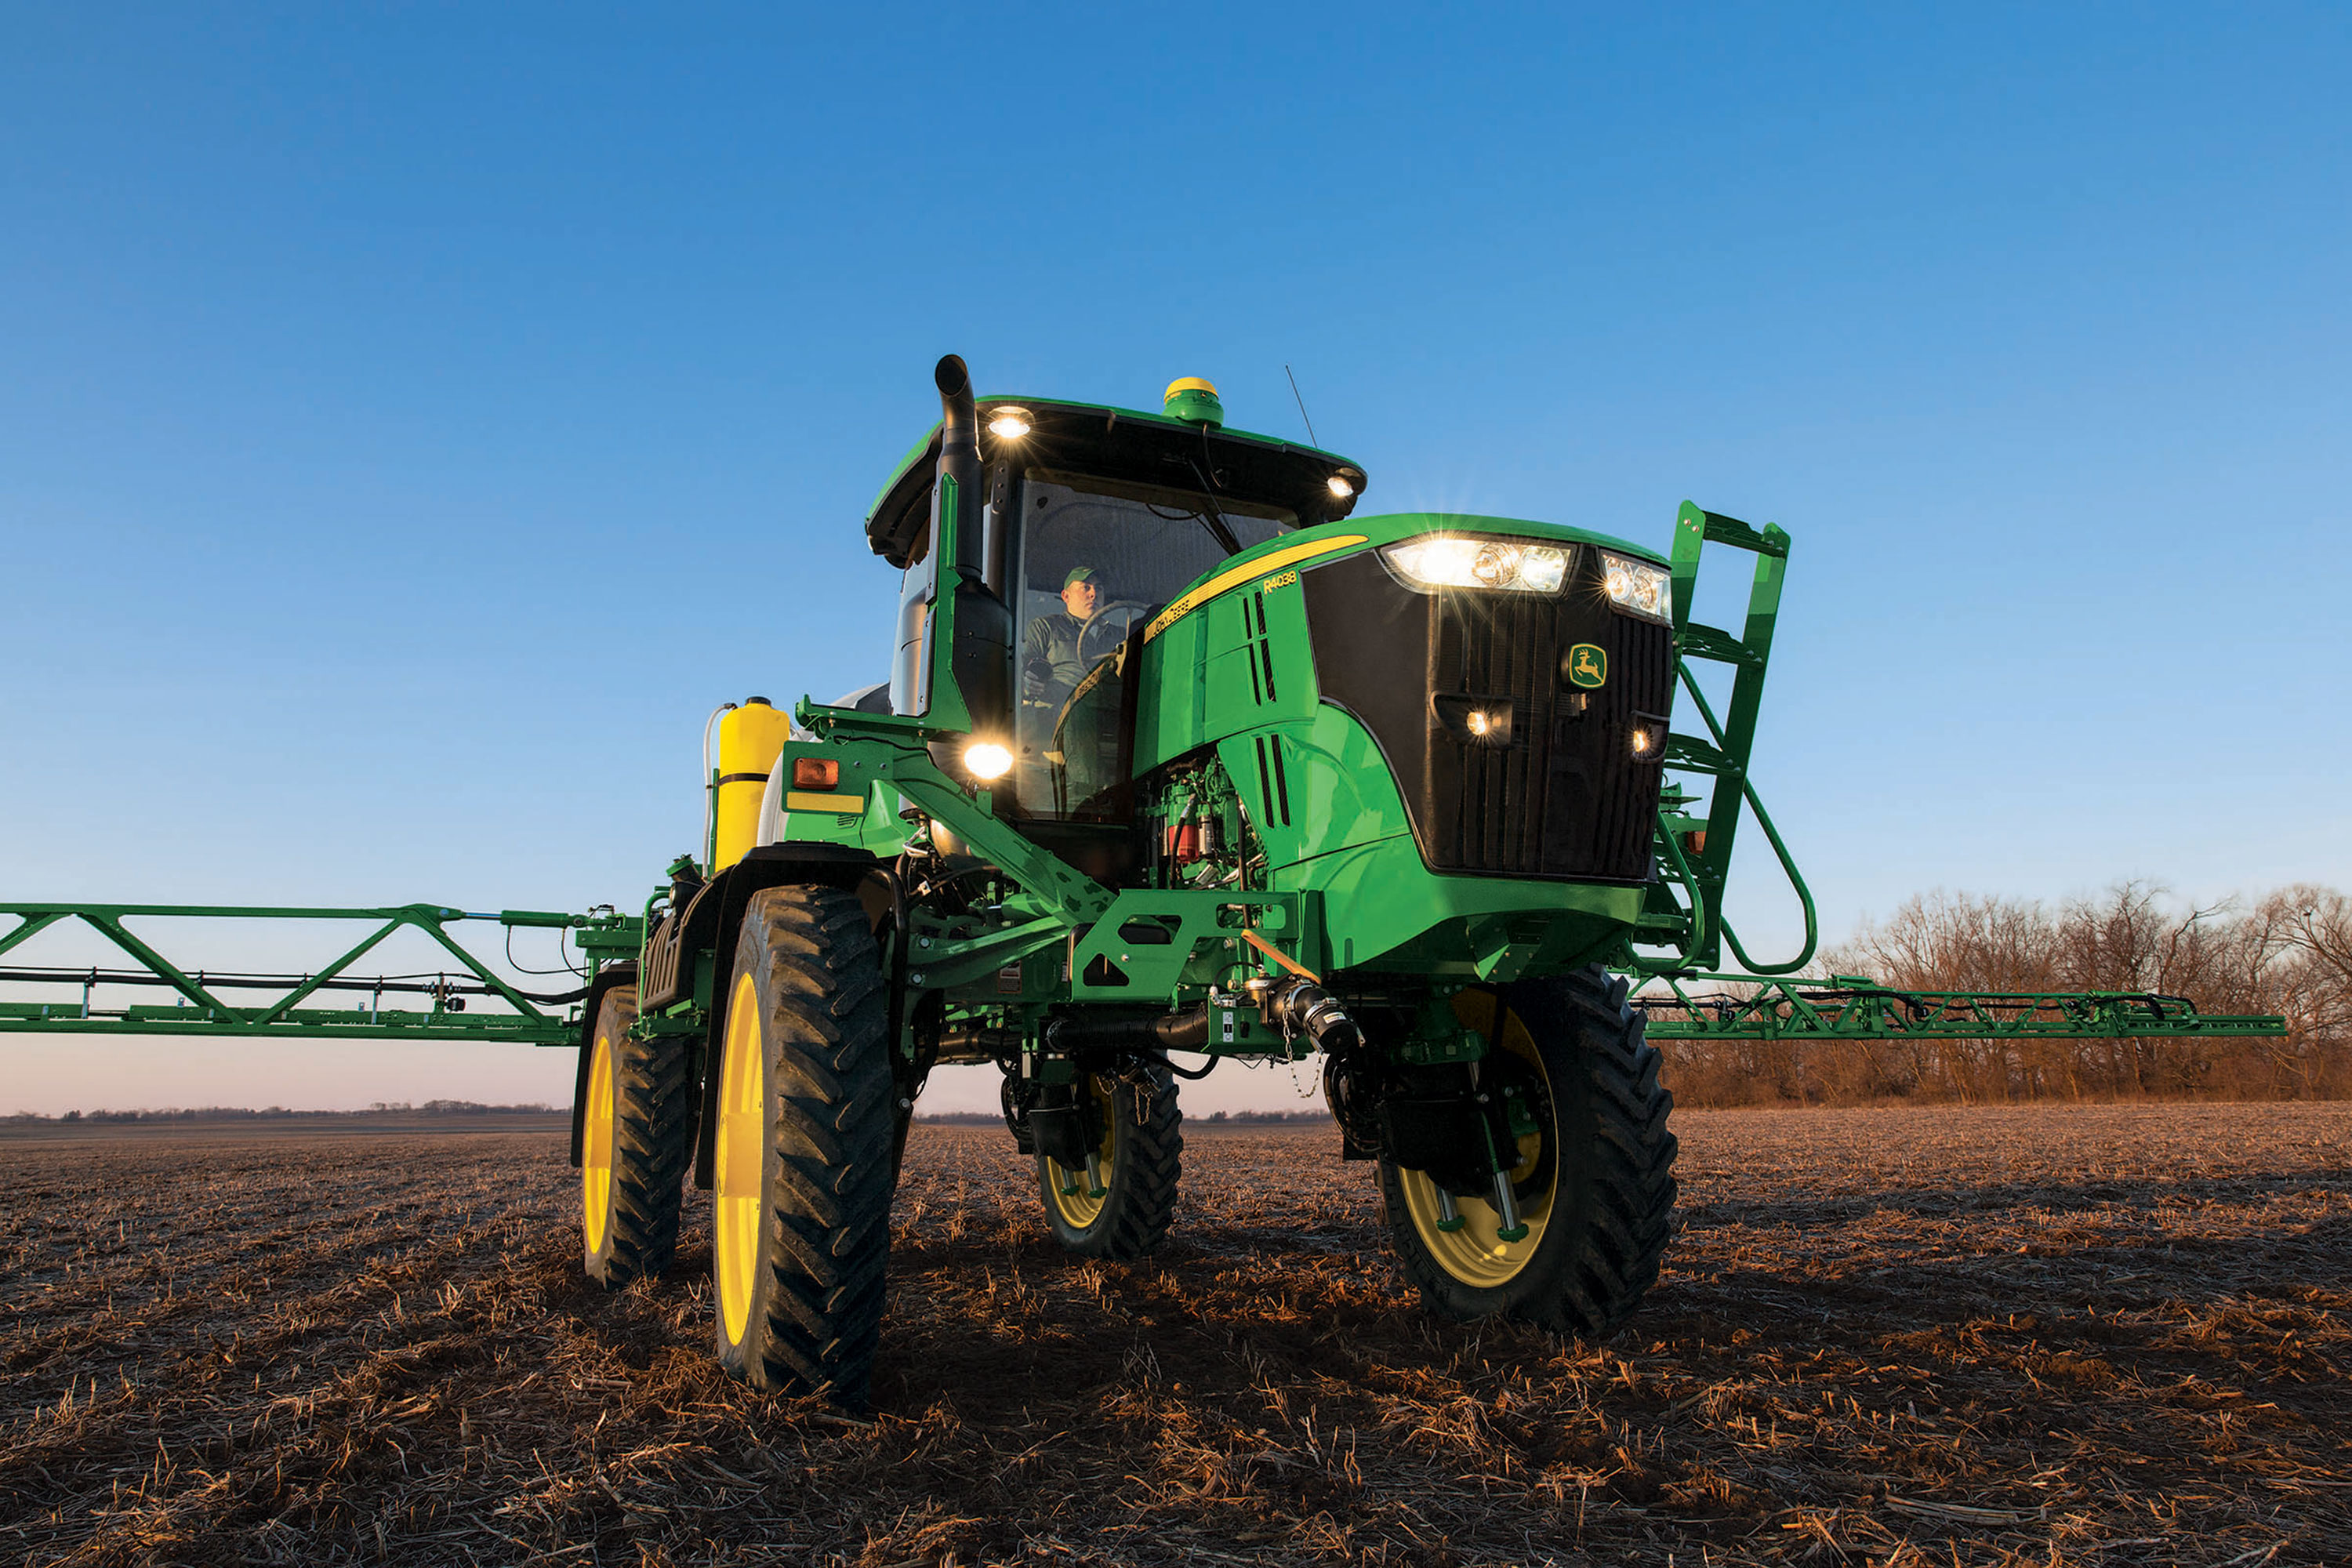 Two New Self-Propelled Sprayers Available from John Deere